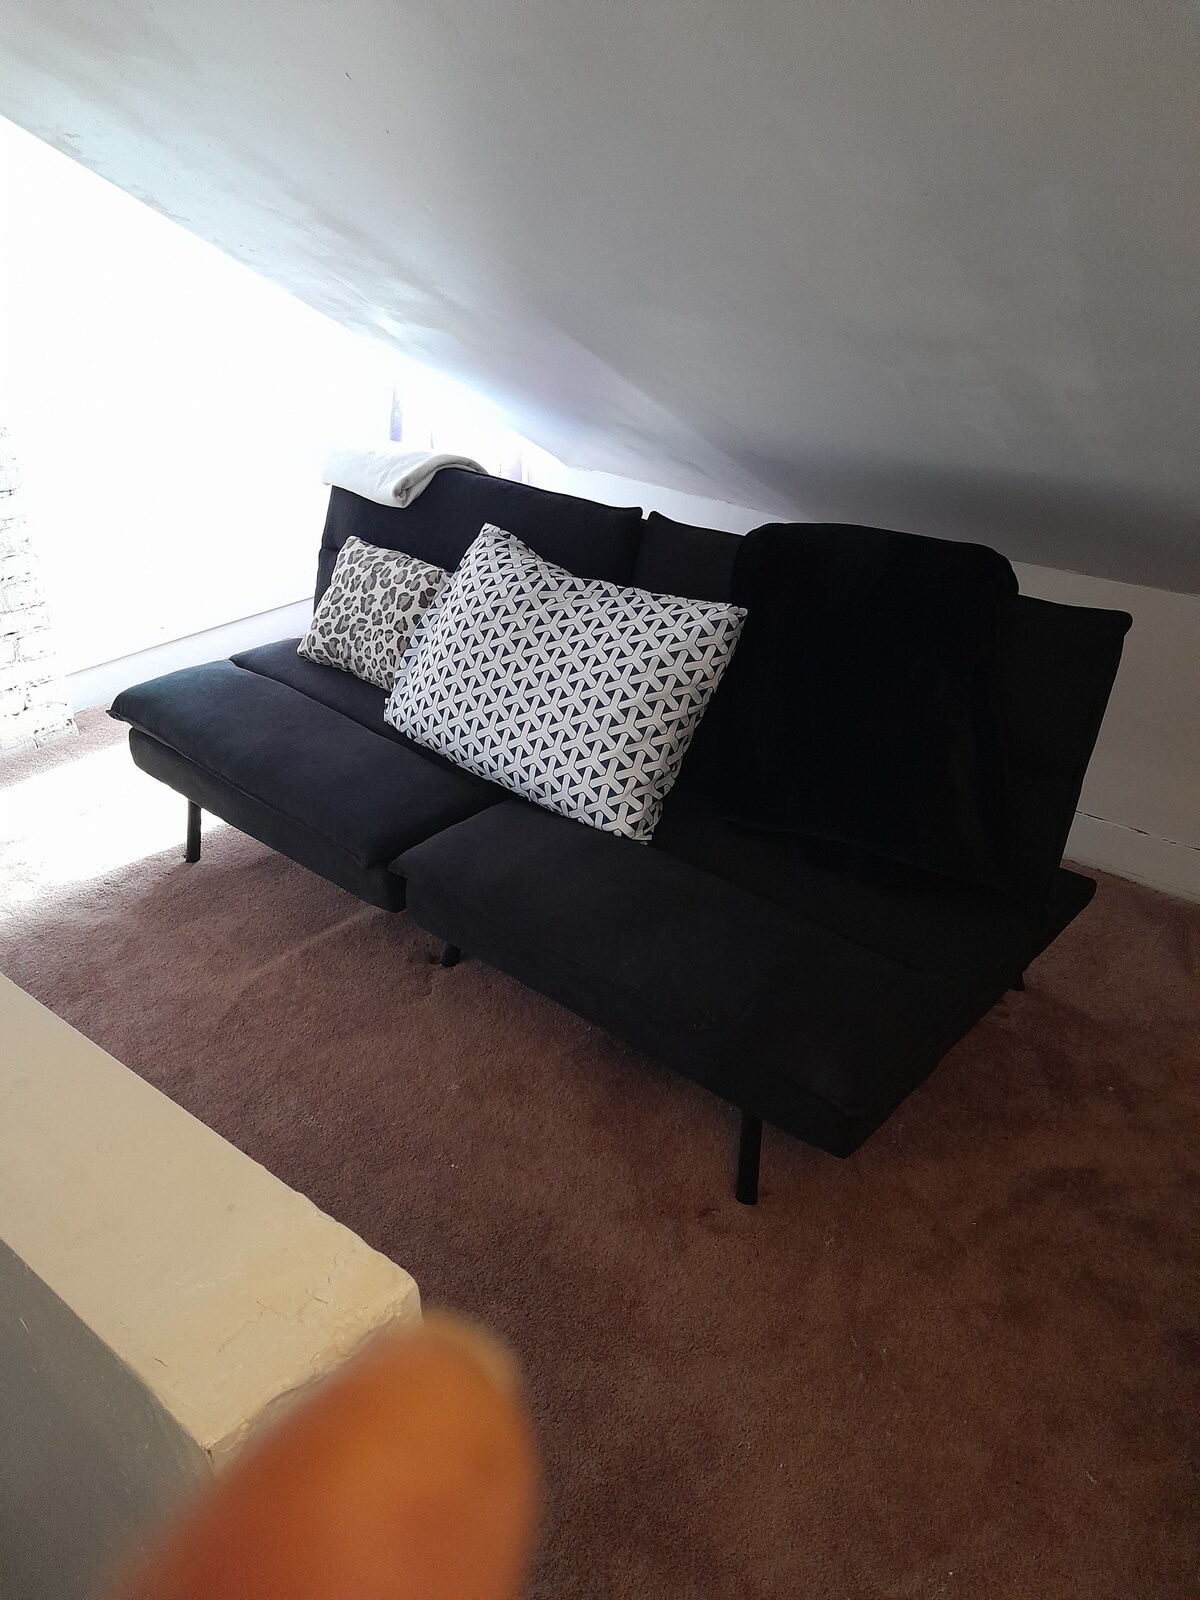 Coed shared space with 1 pullout sofa bed/ rt side